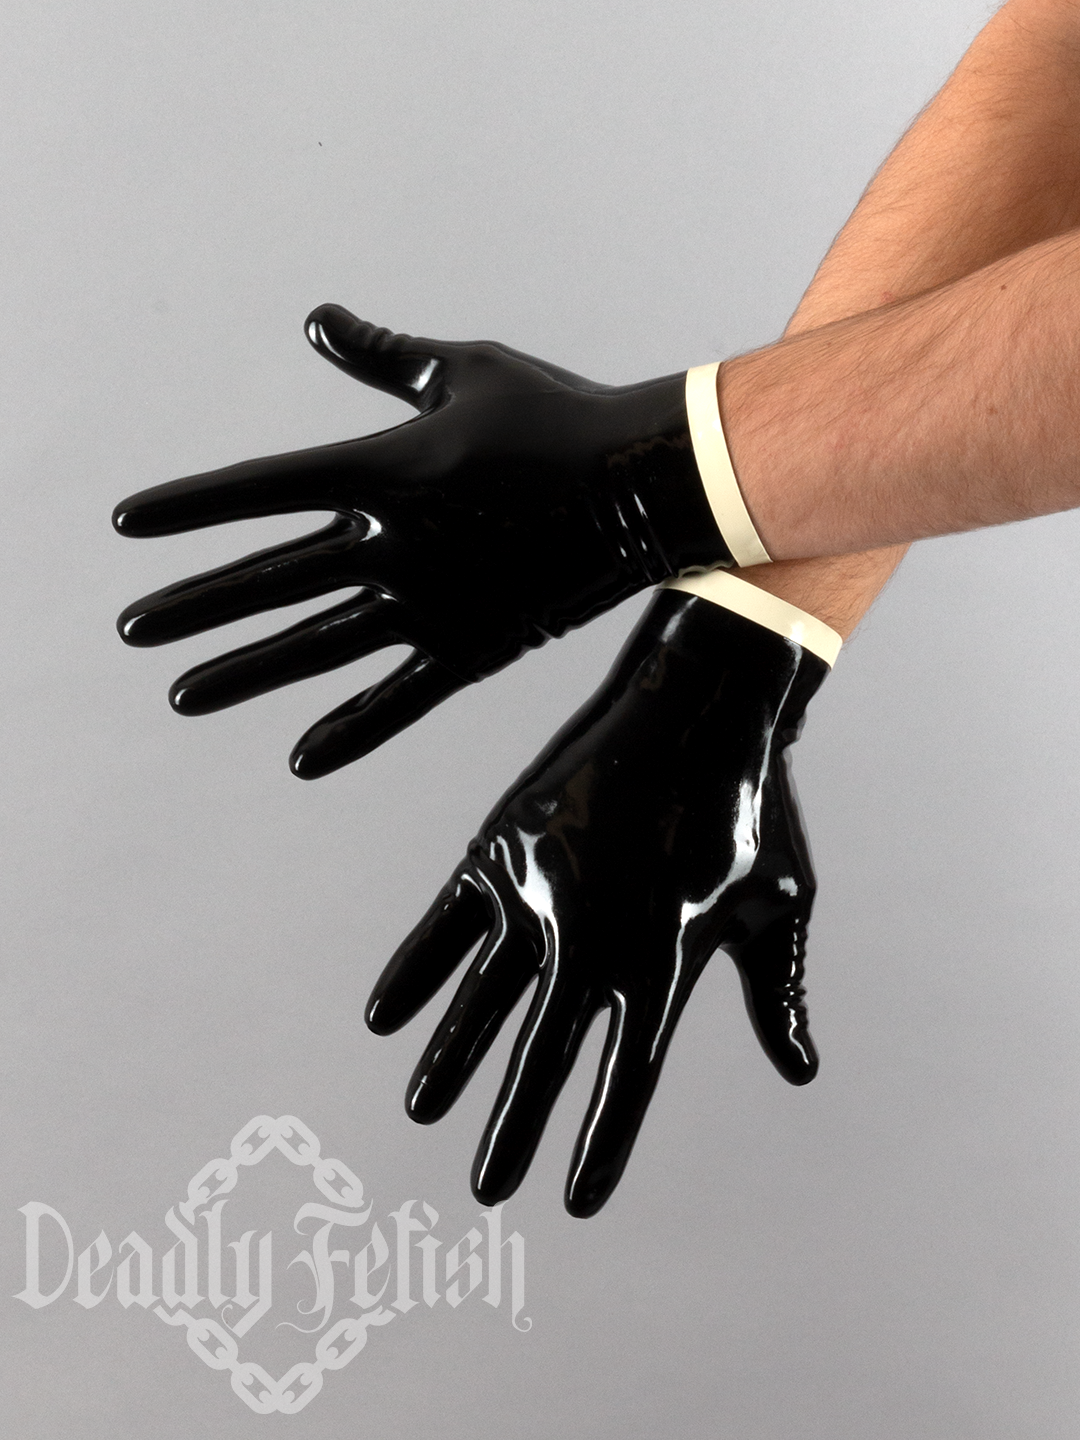 Deadly Fetish Made-To-Order Latex: Gloves With Trim